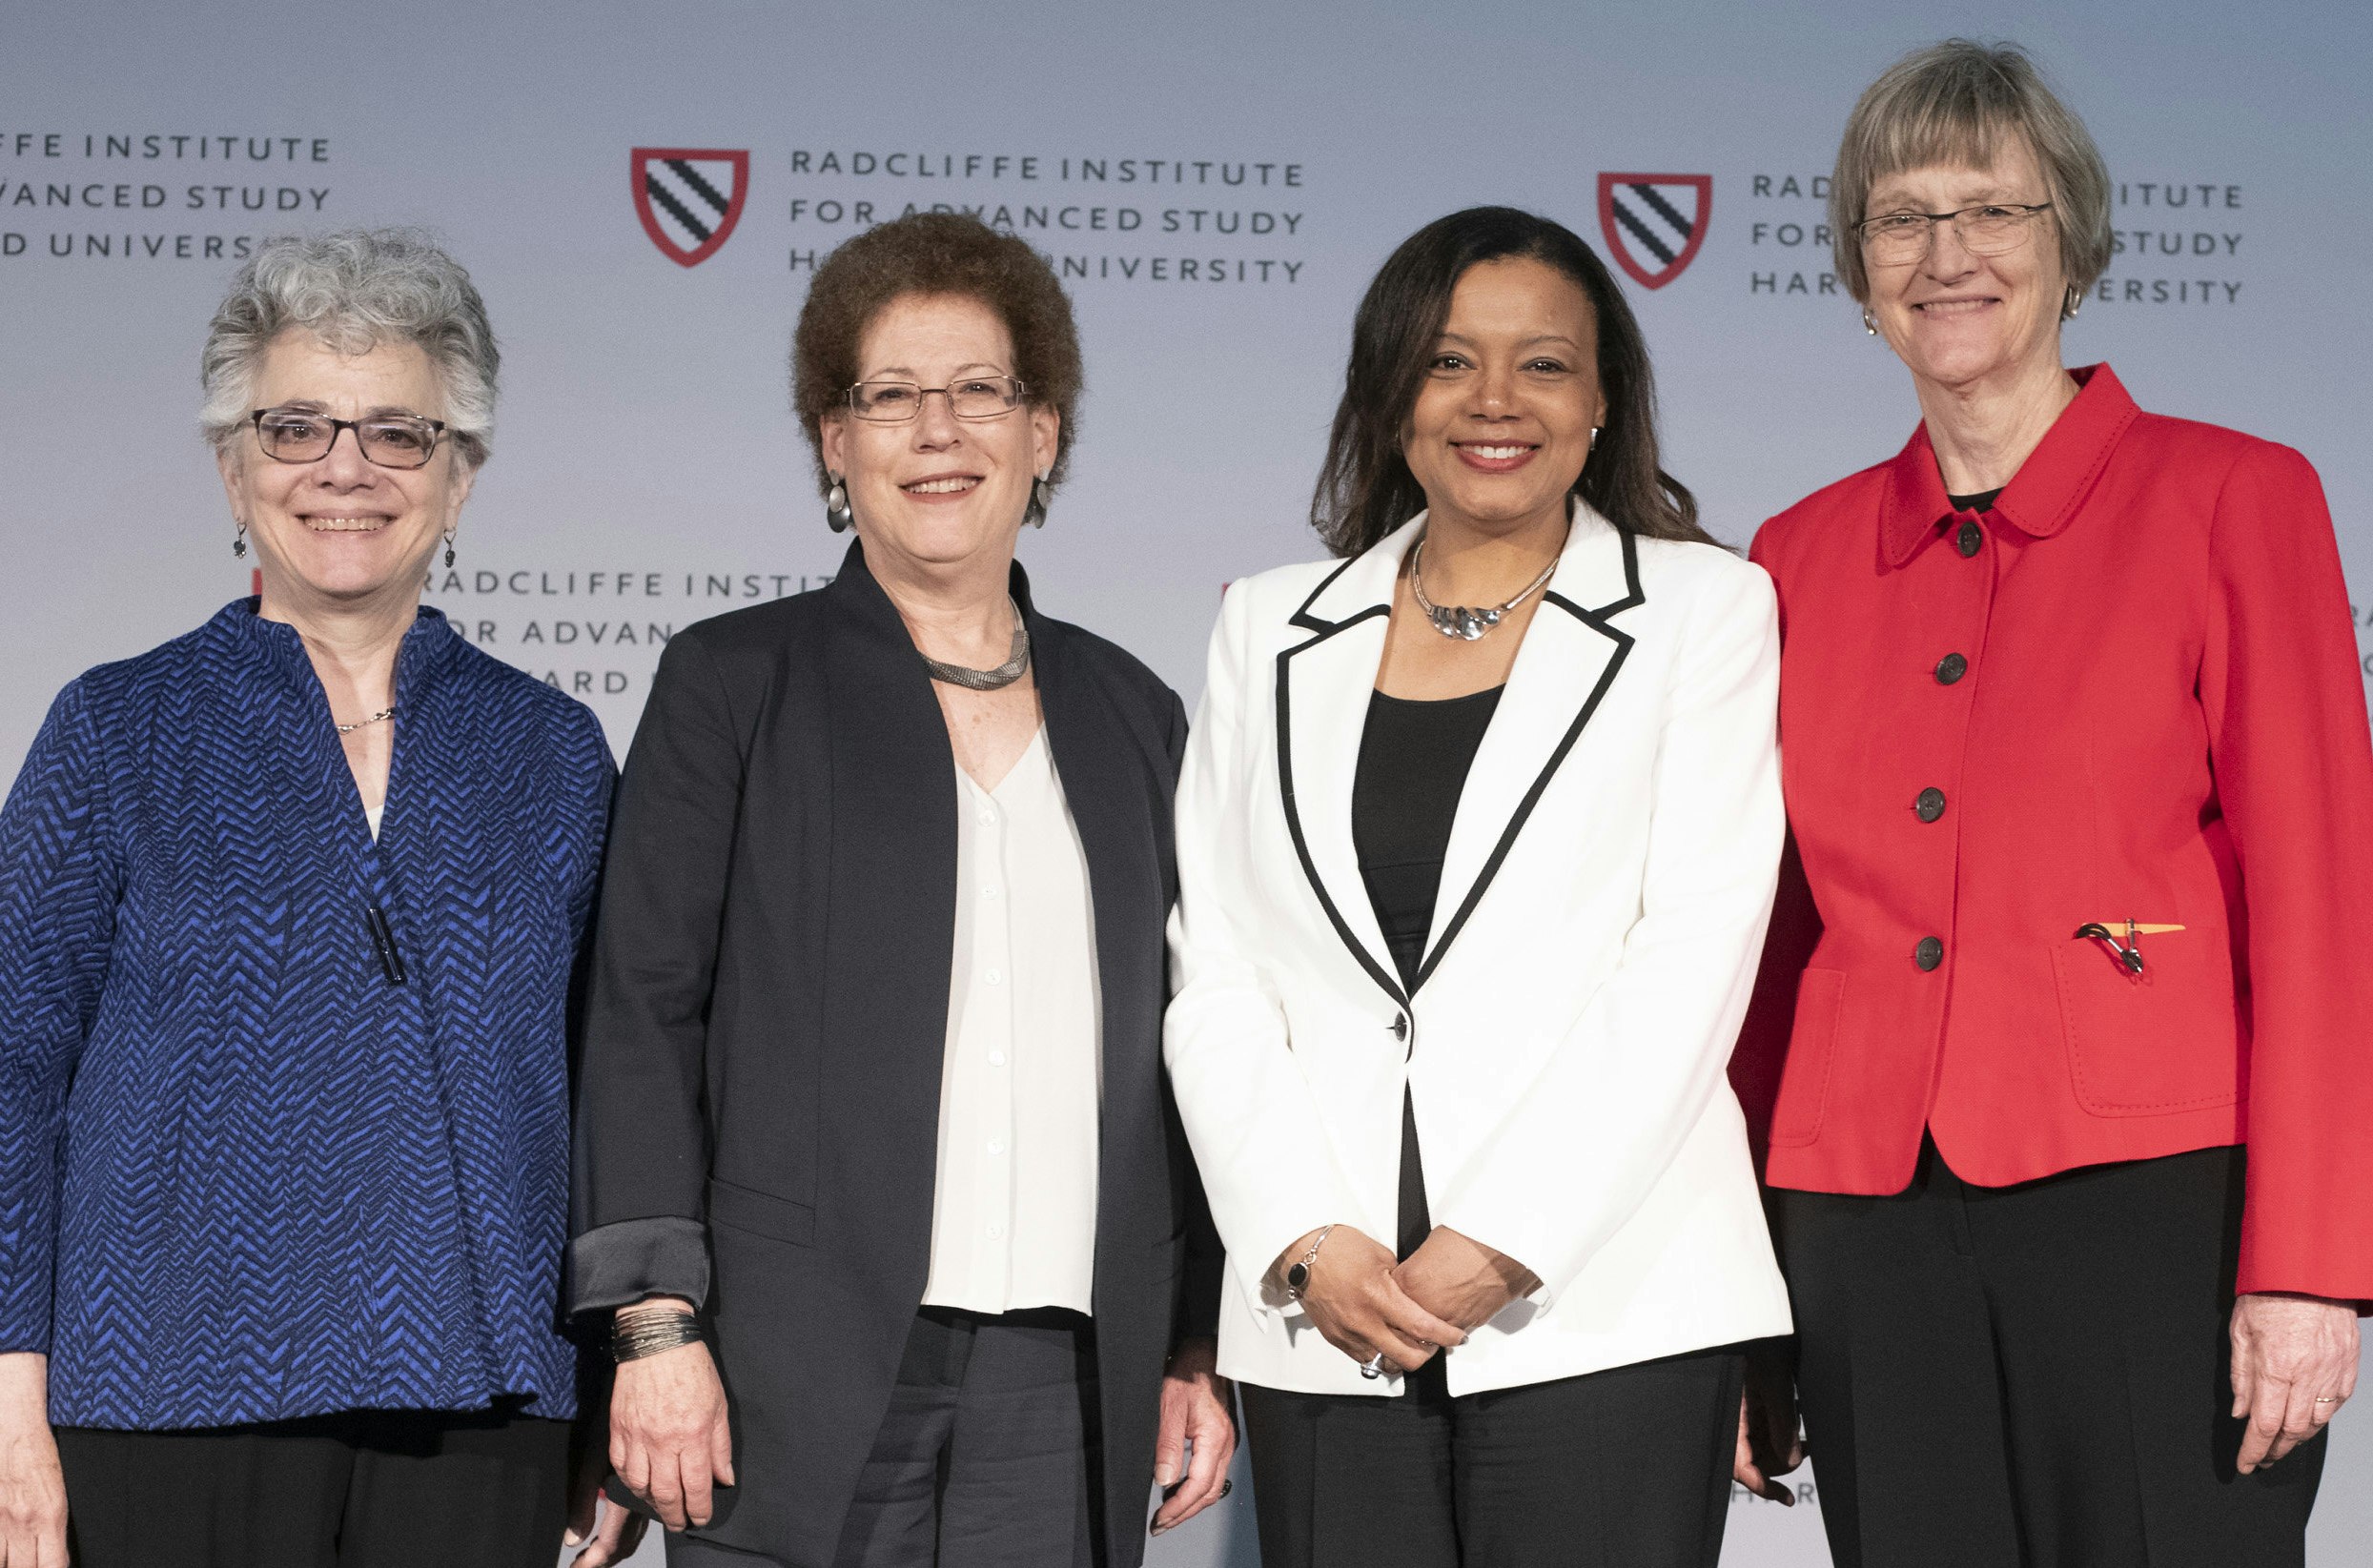 Radcliffe Deans, Barbara J. Grosz, Lizabeth Cohen, Tomiko Brown-Nagin, and Drew Faust (From left to right)